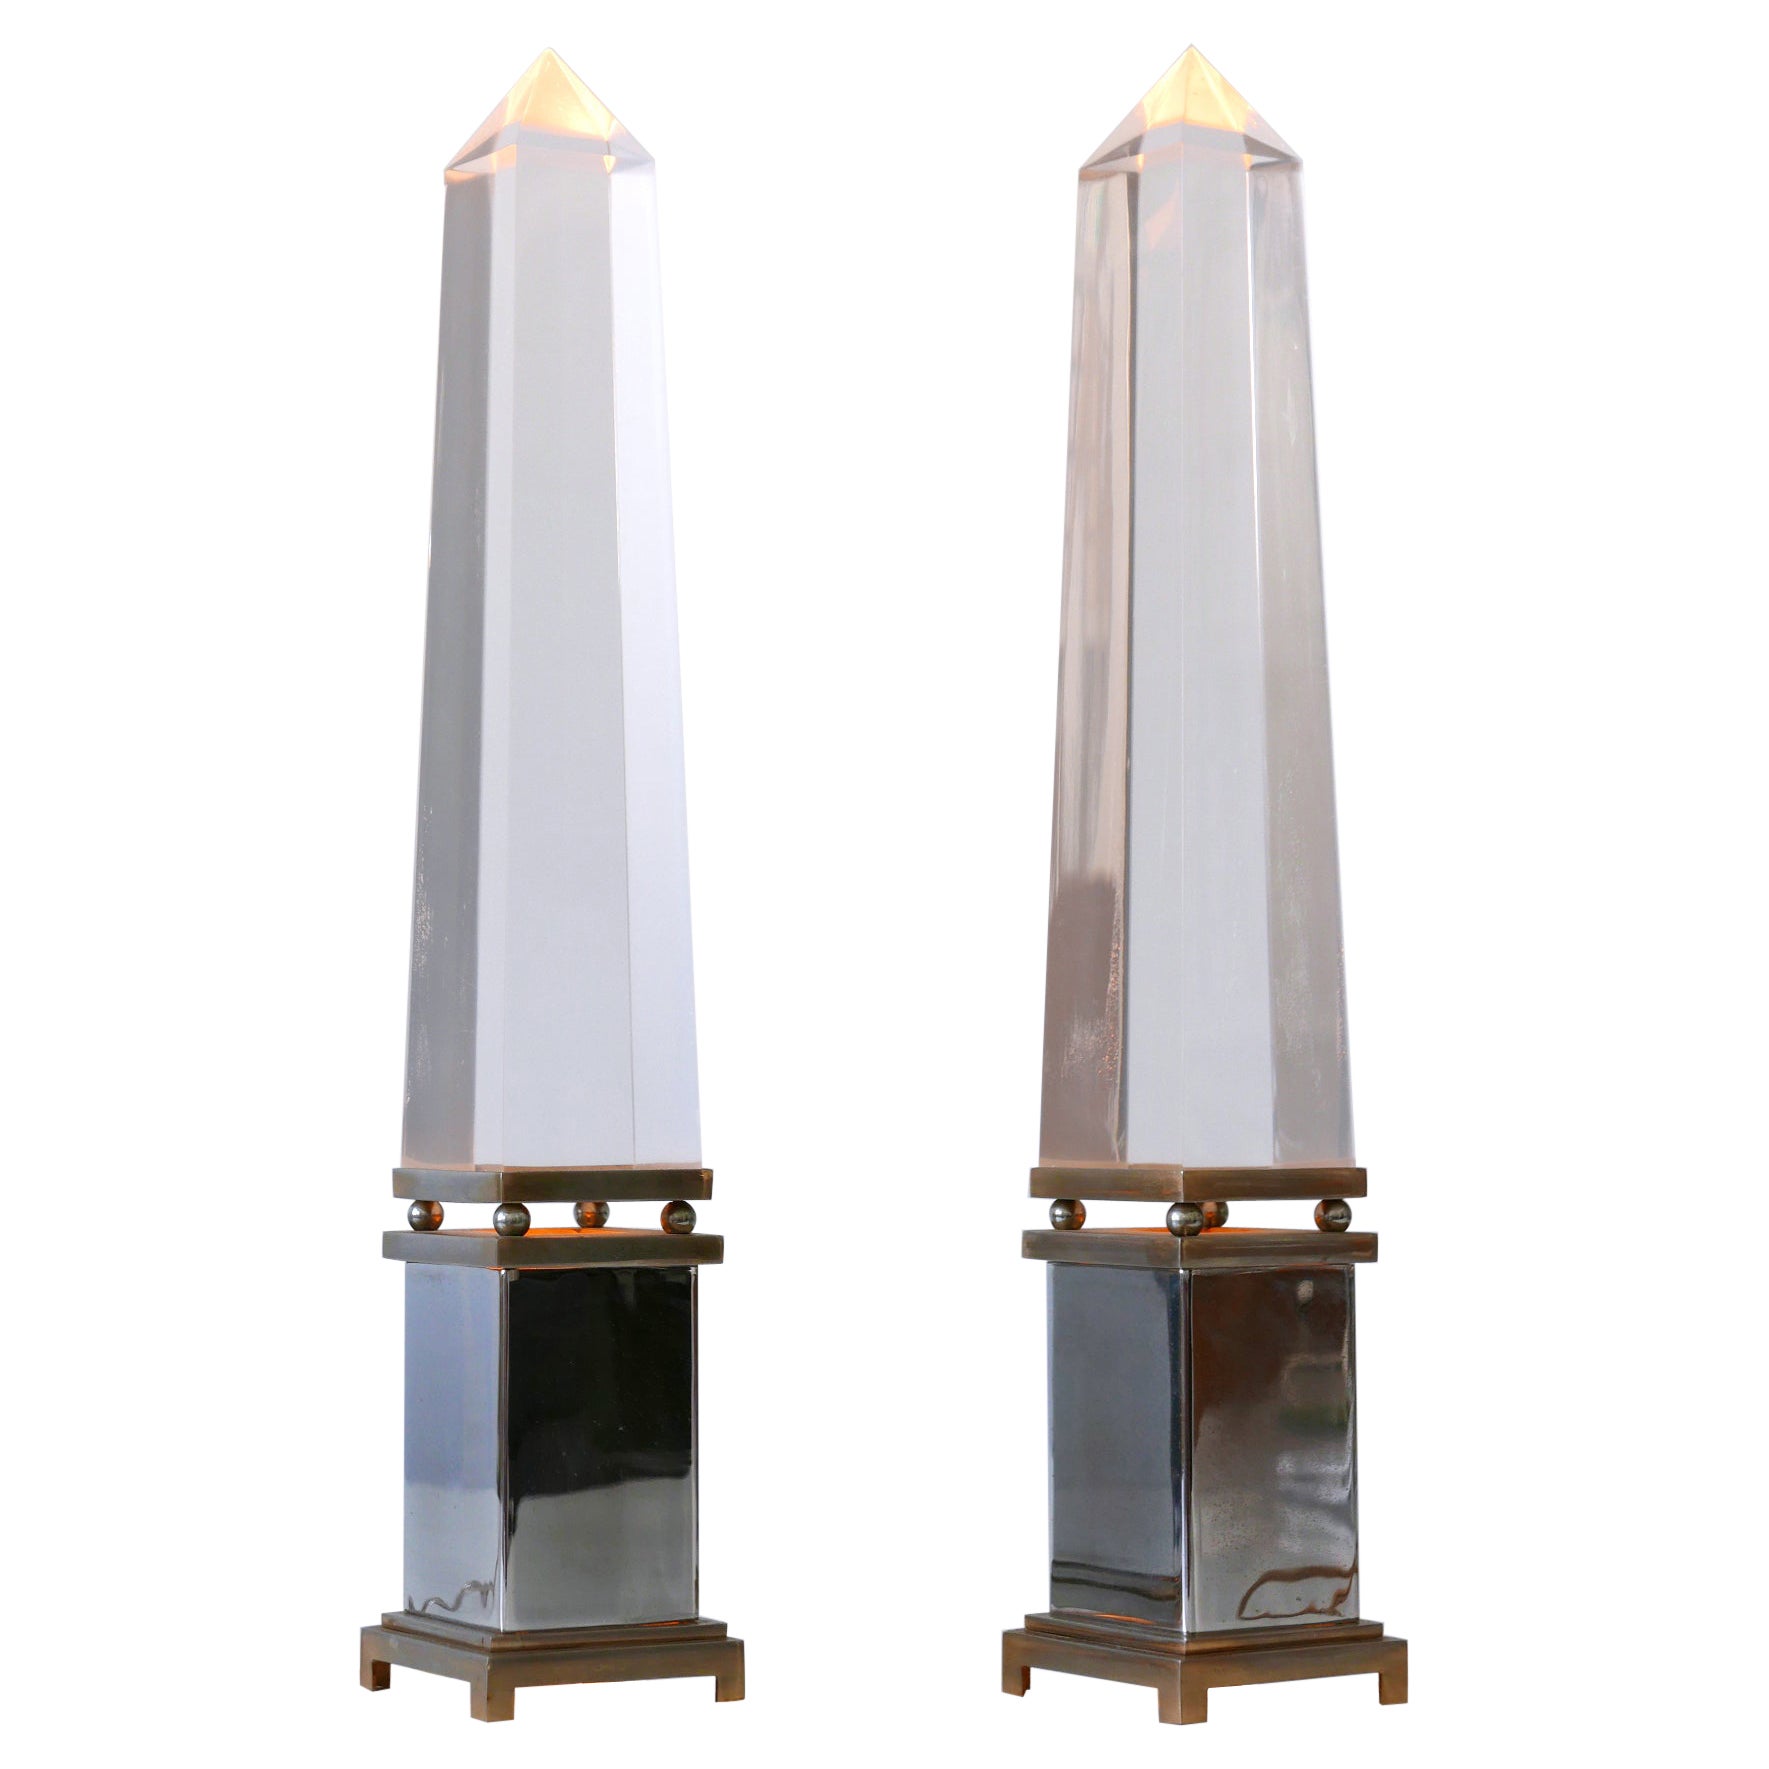 Set of Two Lucite Obelisk Table Lamps by Sandro Petti for Maison Jansen France